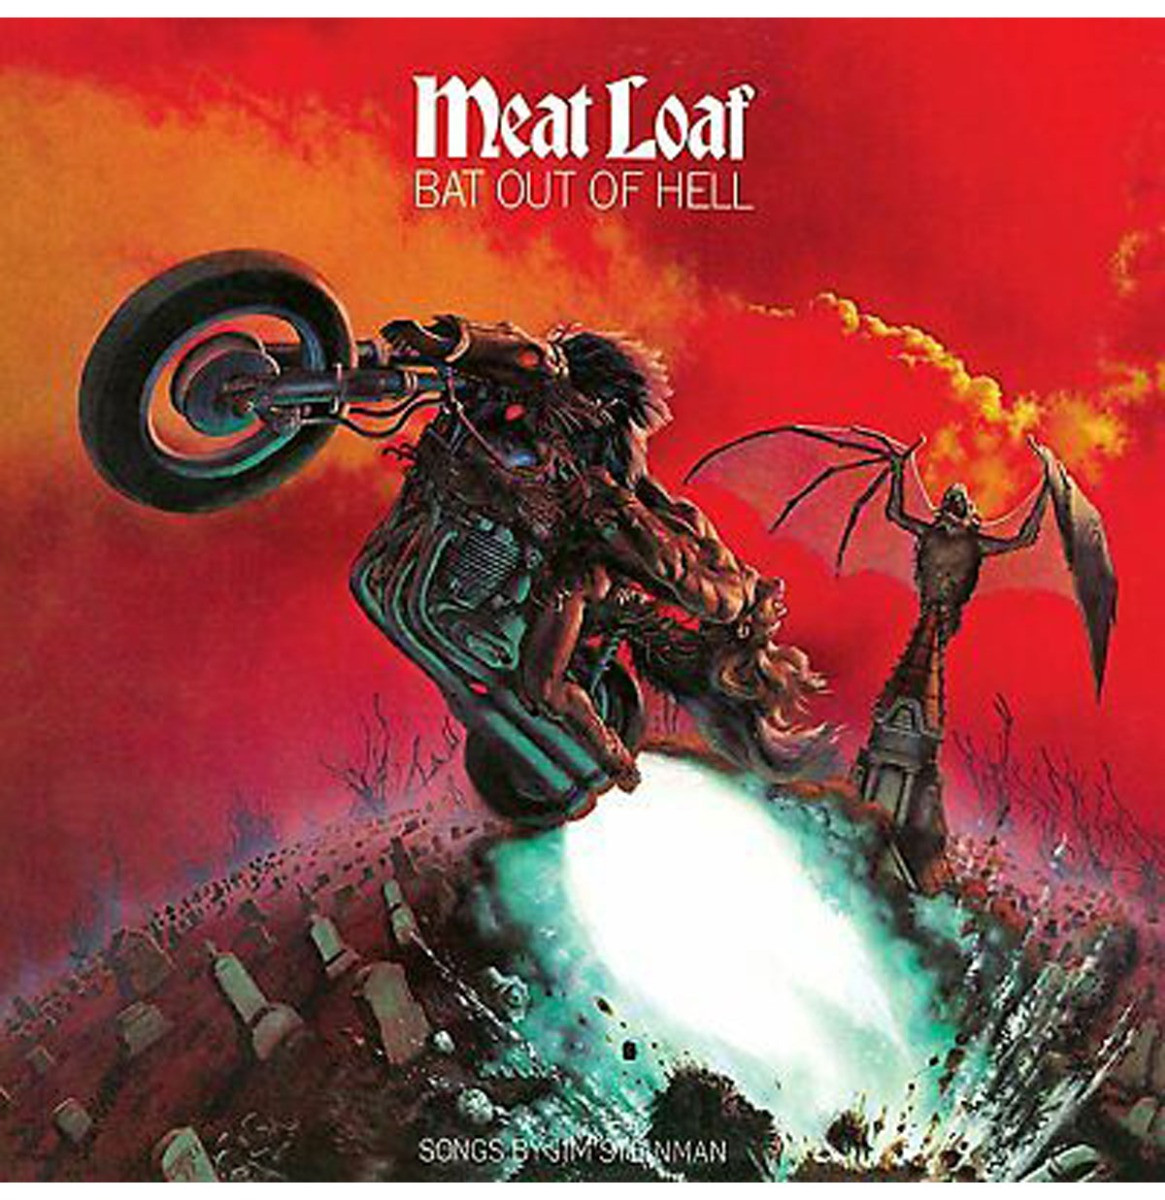 Meat Loaf - Bat Out Of Hell LP